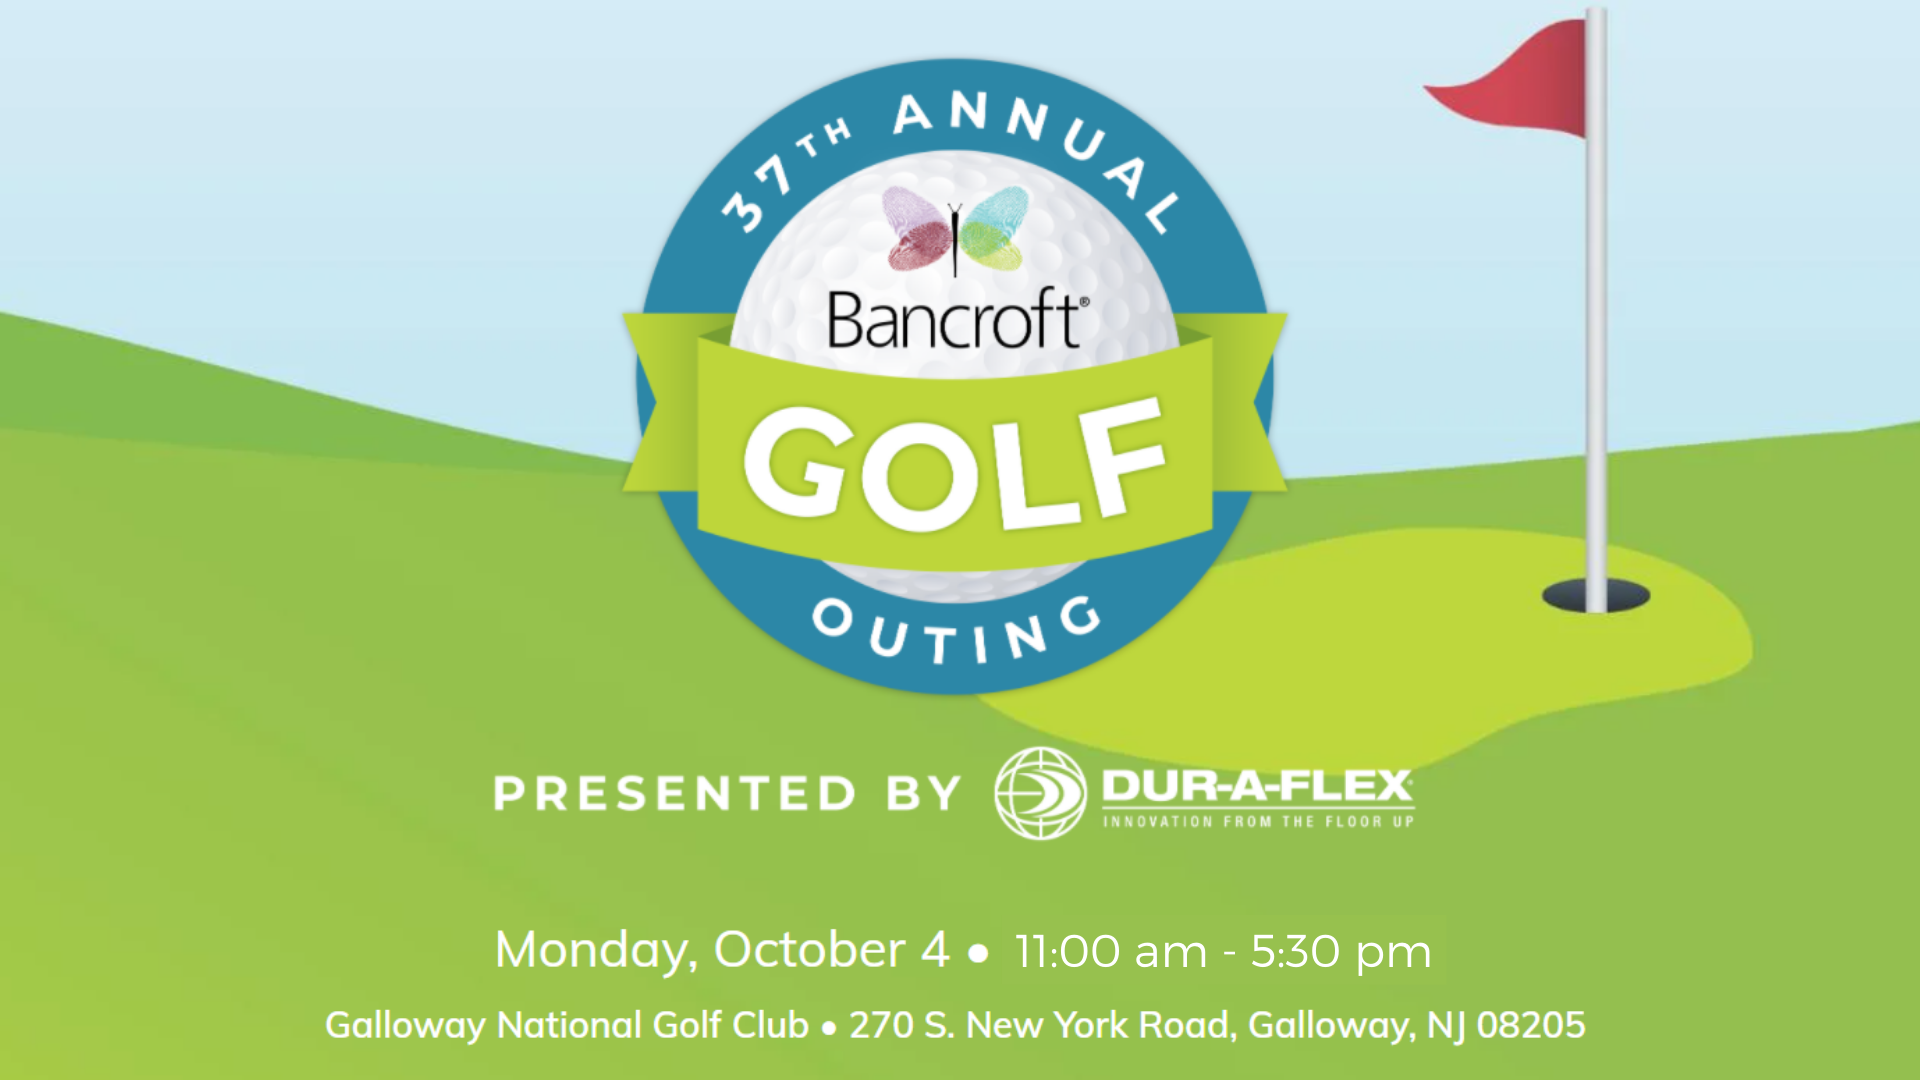 Bancroft's 37th Annual Golf Outing logo on a golf course with the event information in white text